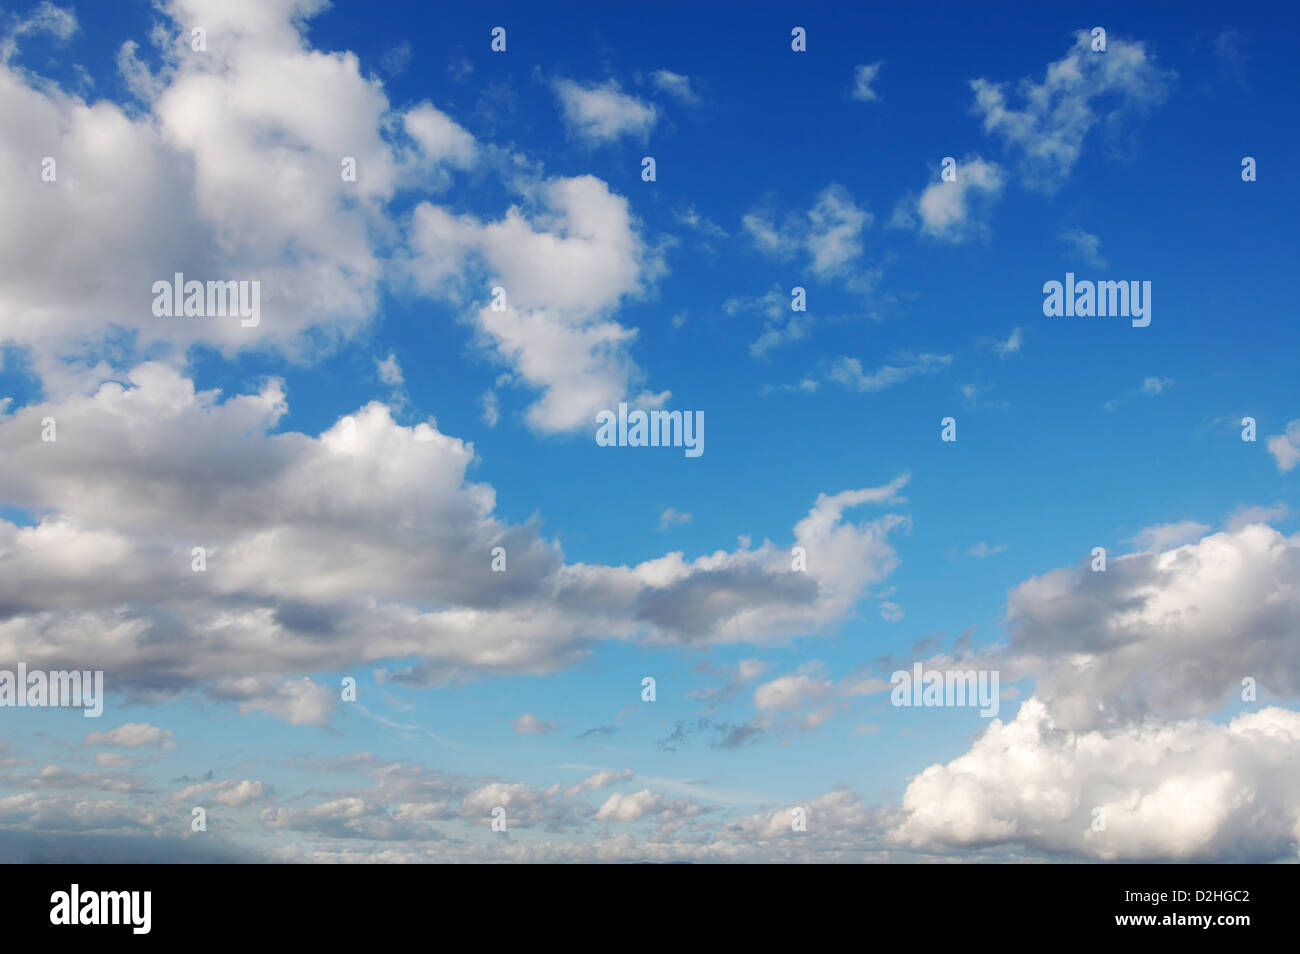 Blue sky with several cumulus white clouds. Stock Photo